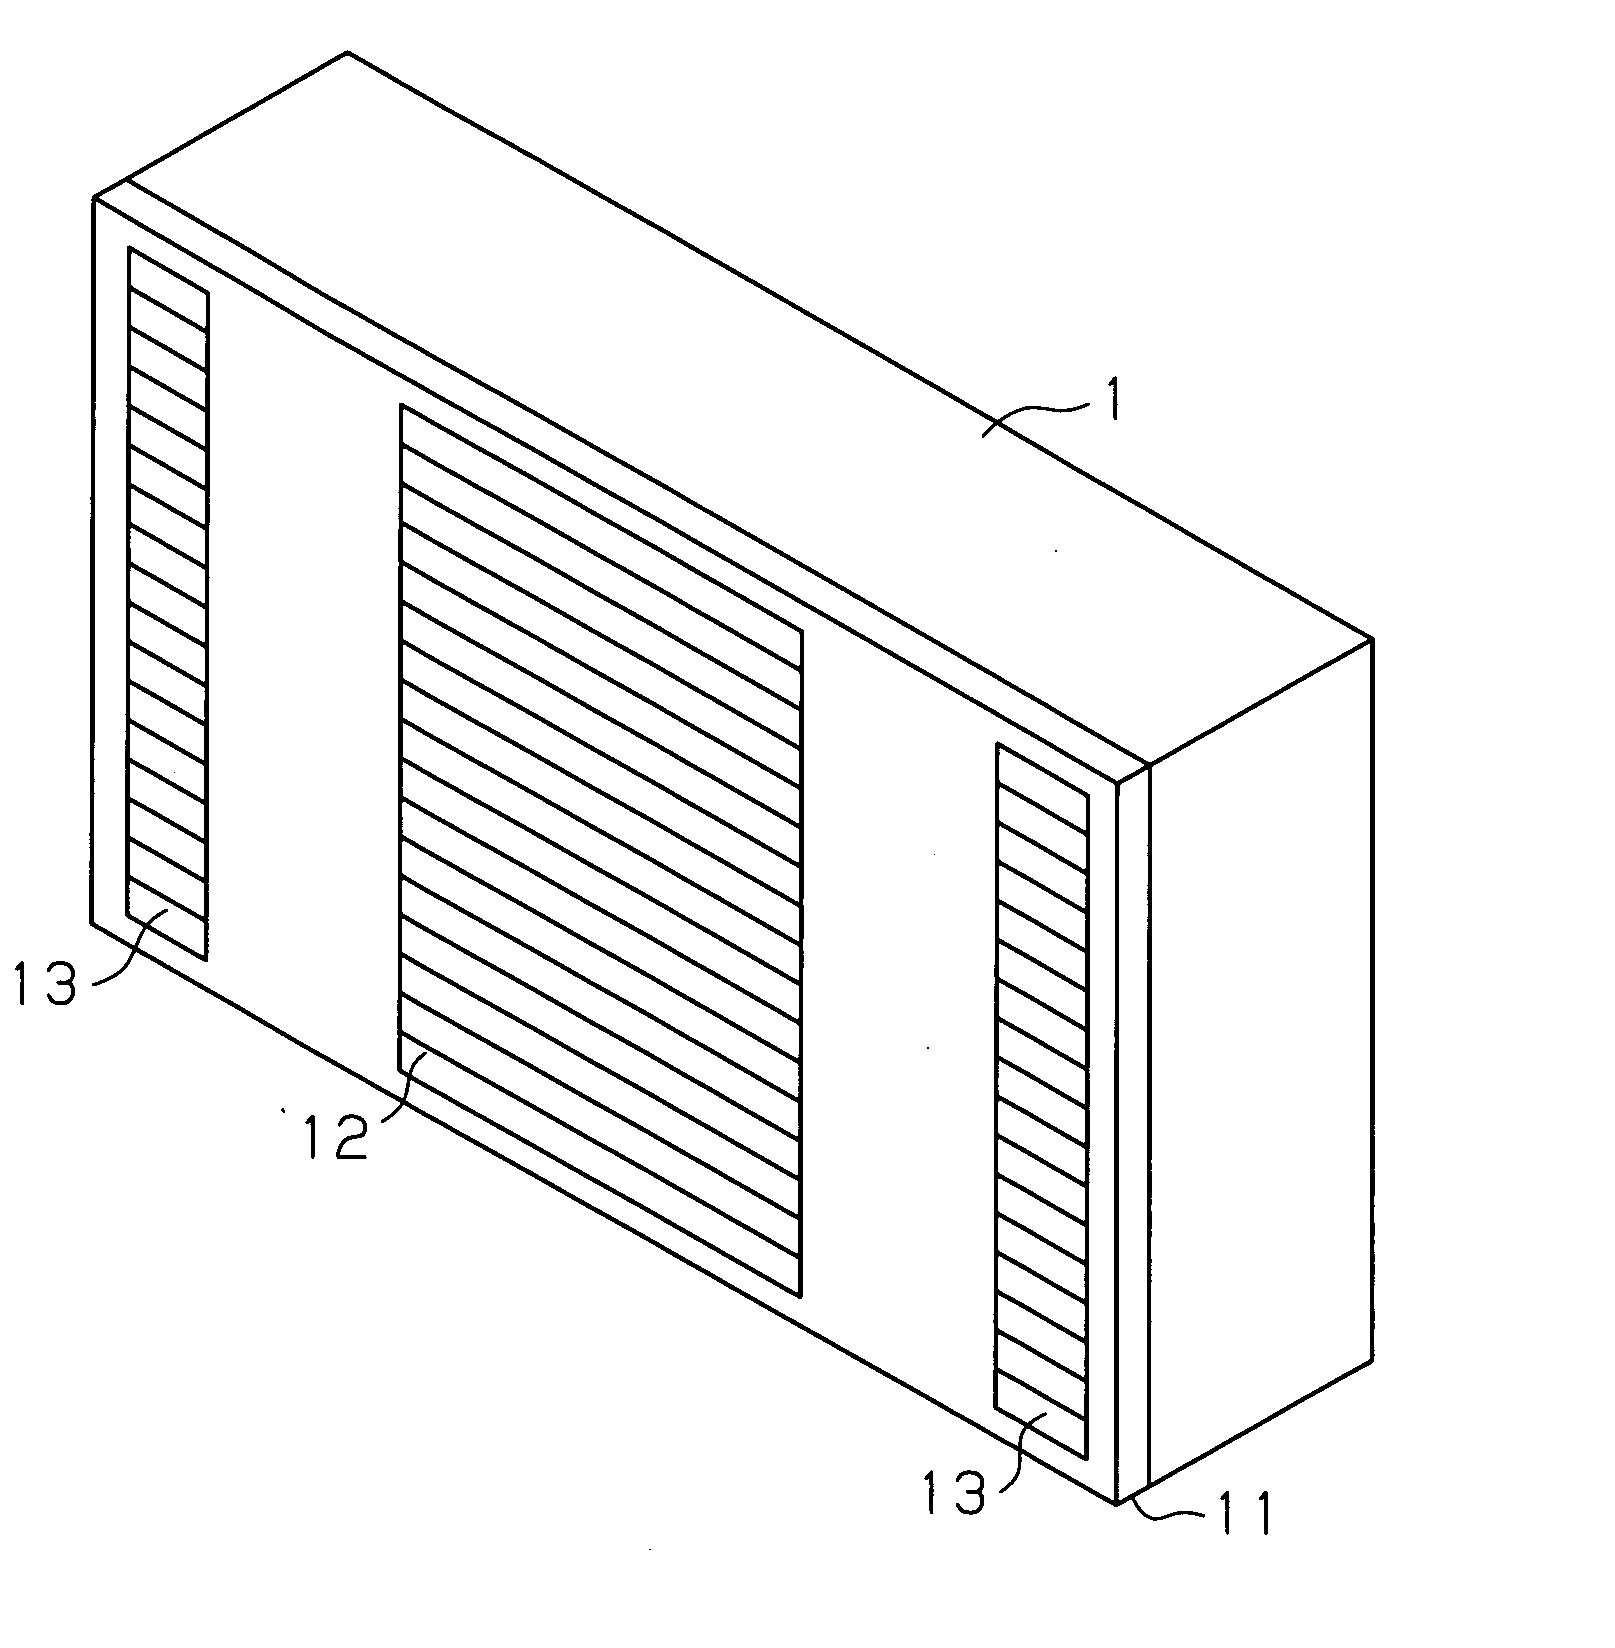 Centrifugal Fan and Air Conditioner Using the Same